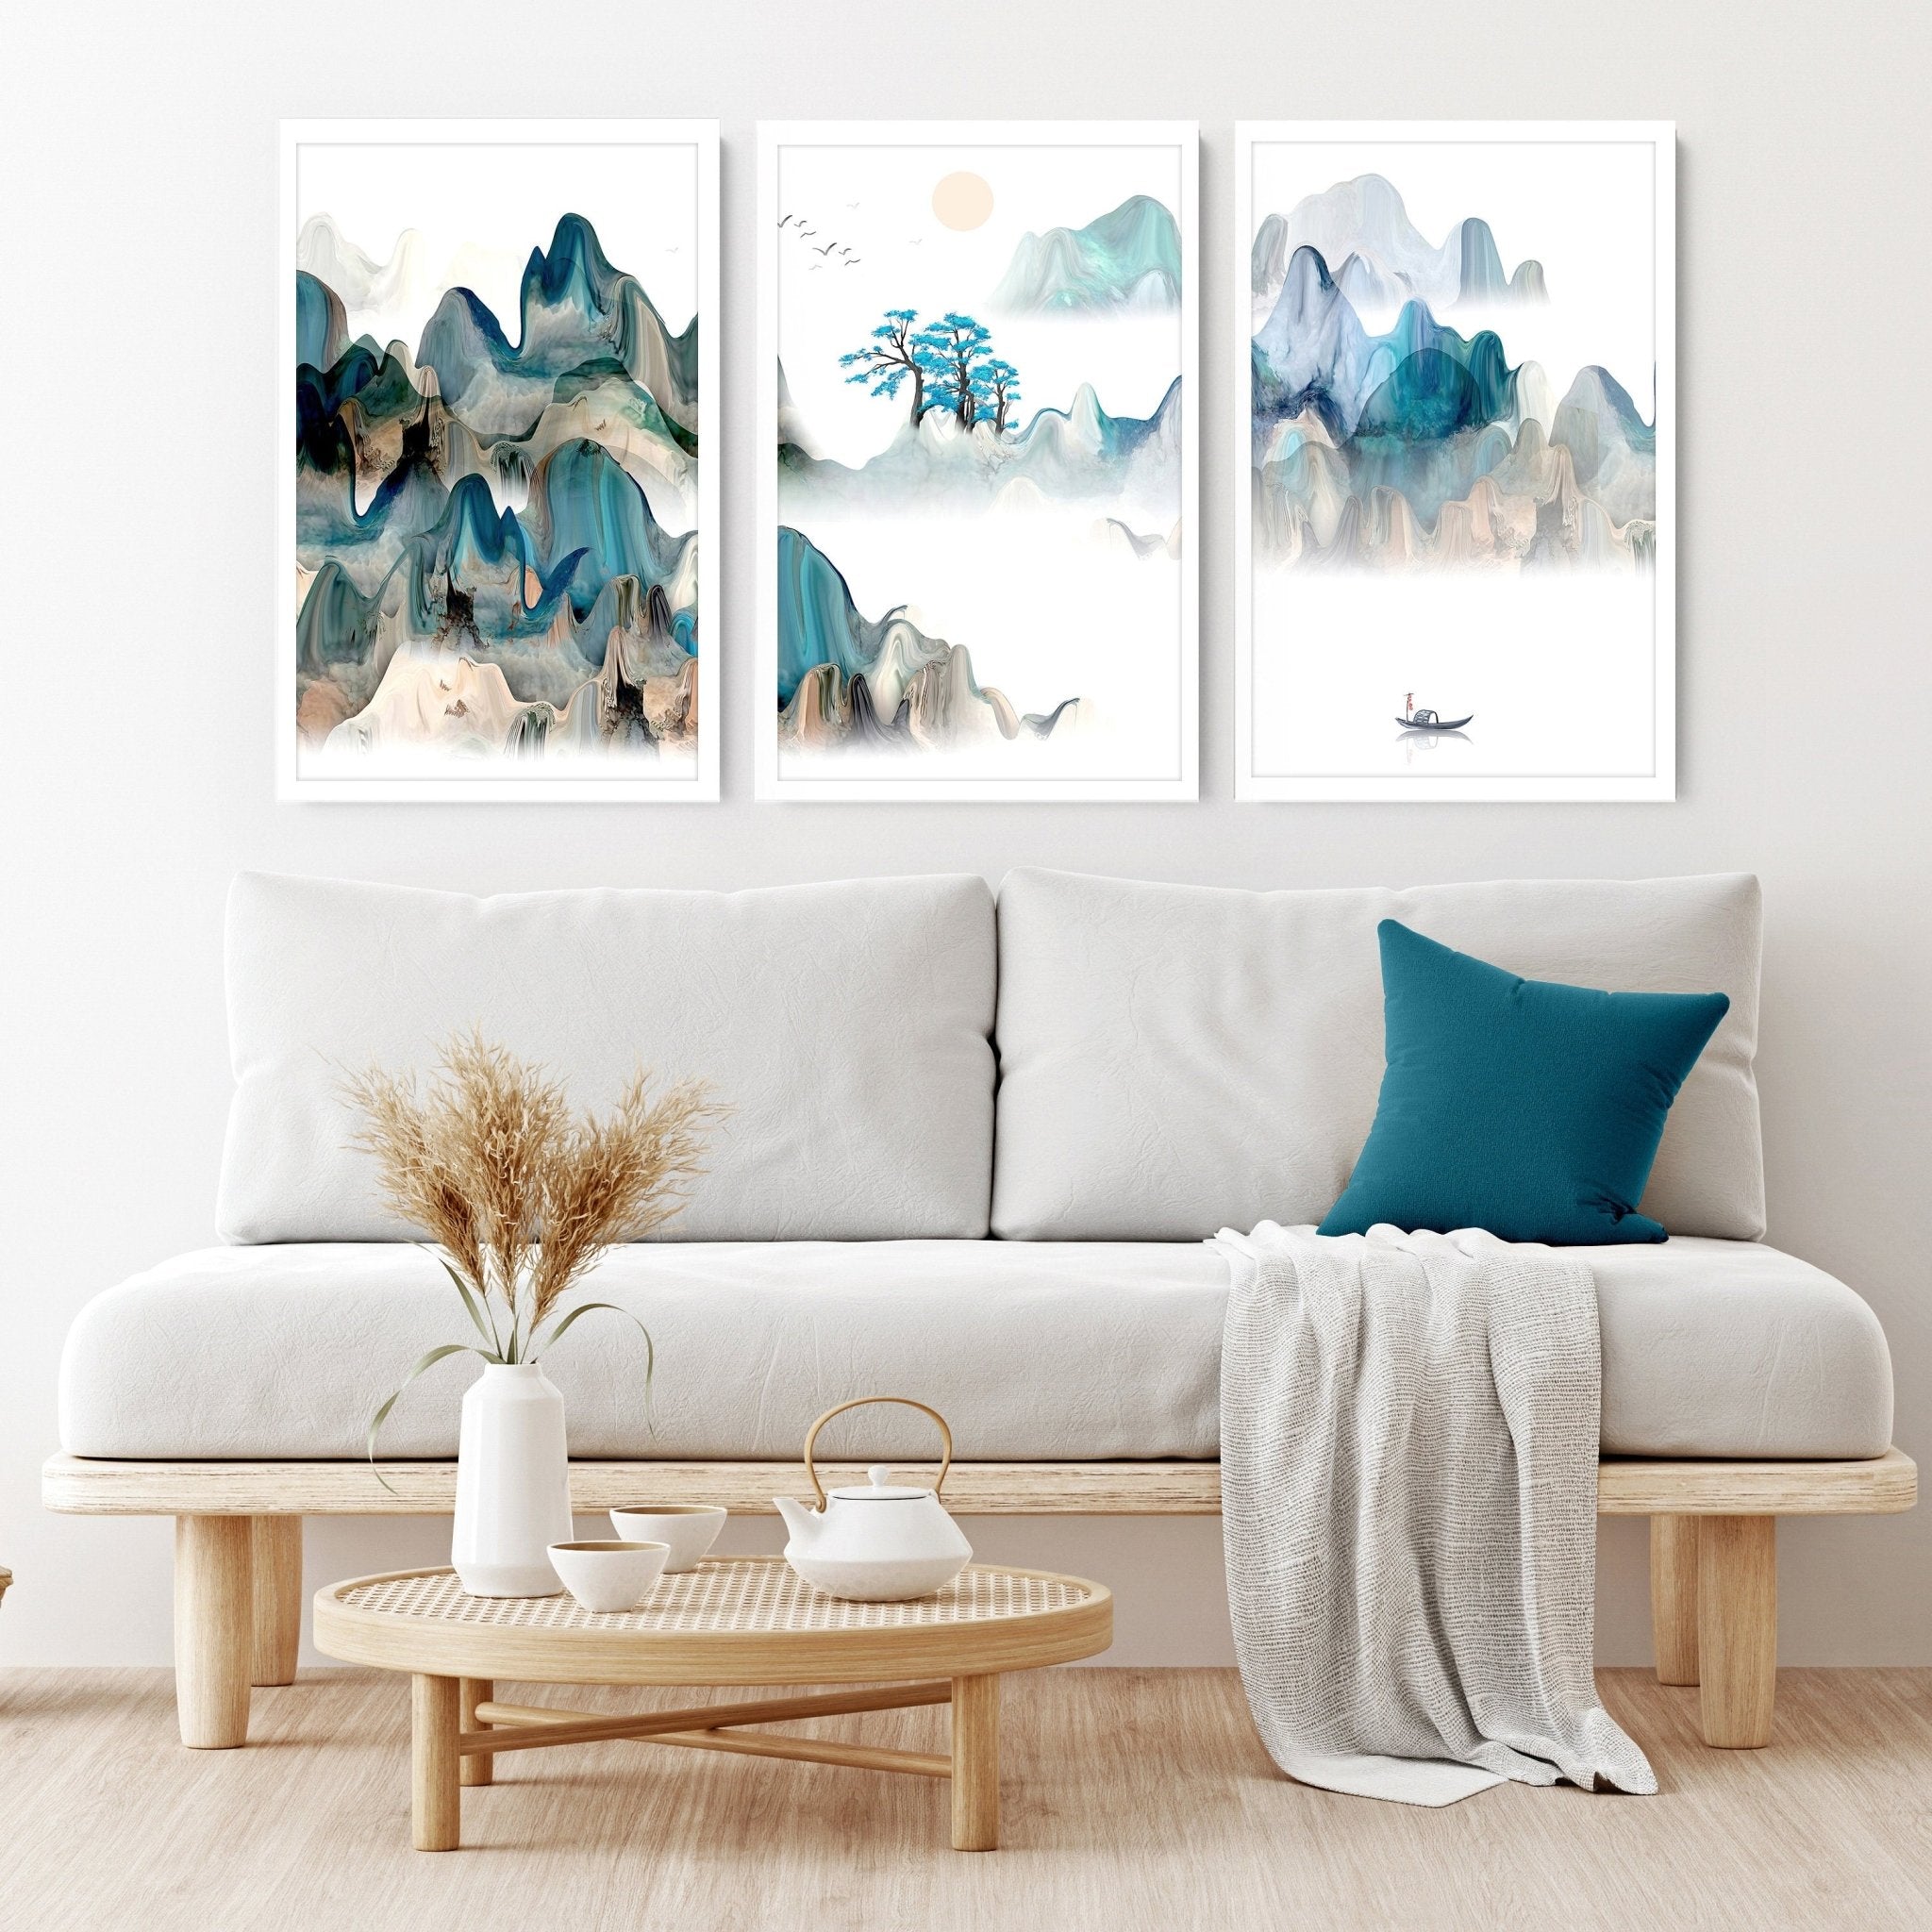 Japanese style decor | set of 3 wall art prints for living room